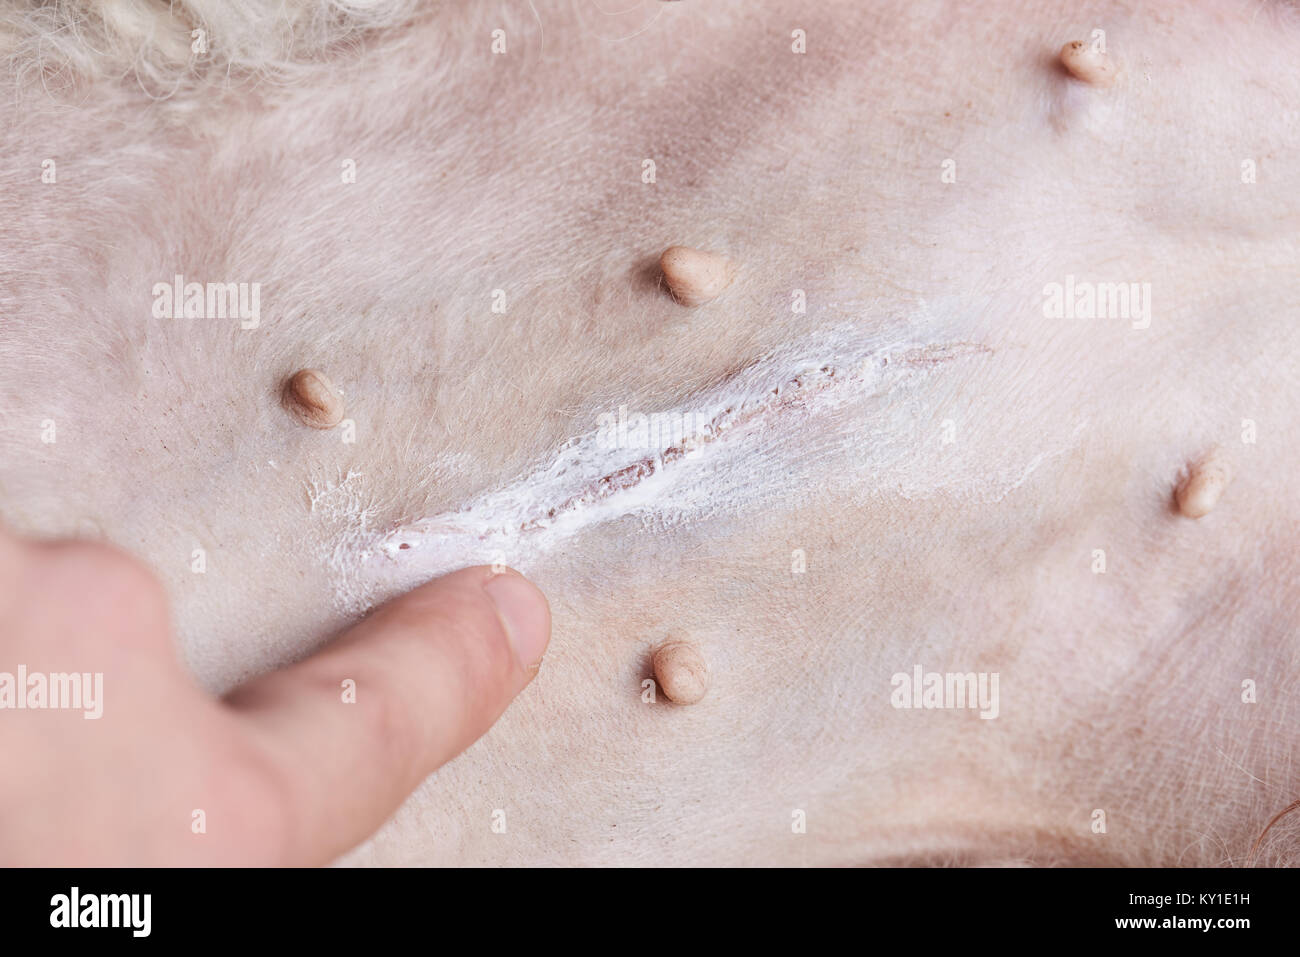 Dog belly with scar from surgery close-up Stock Photo